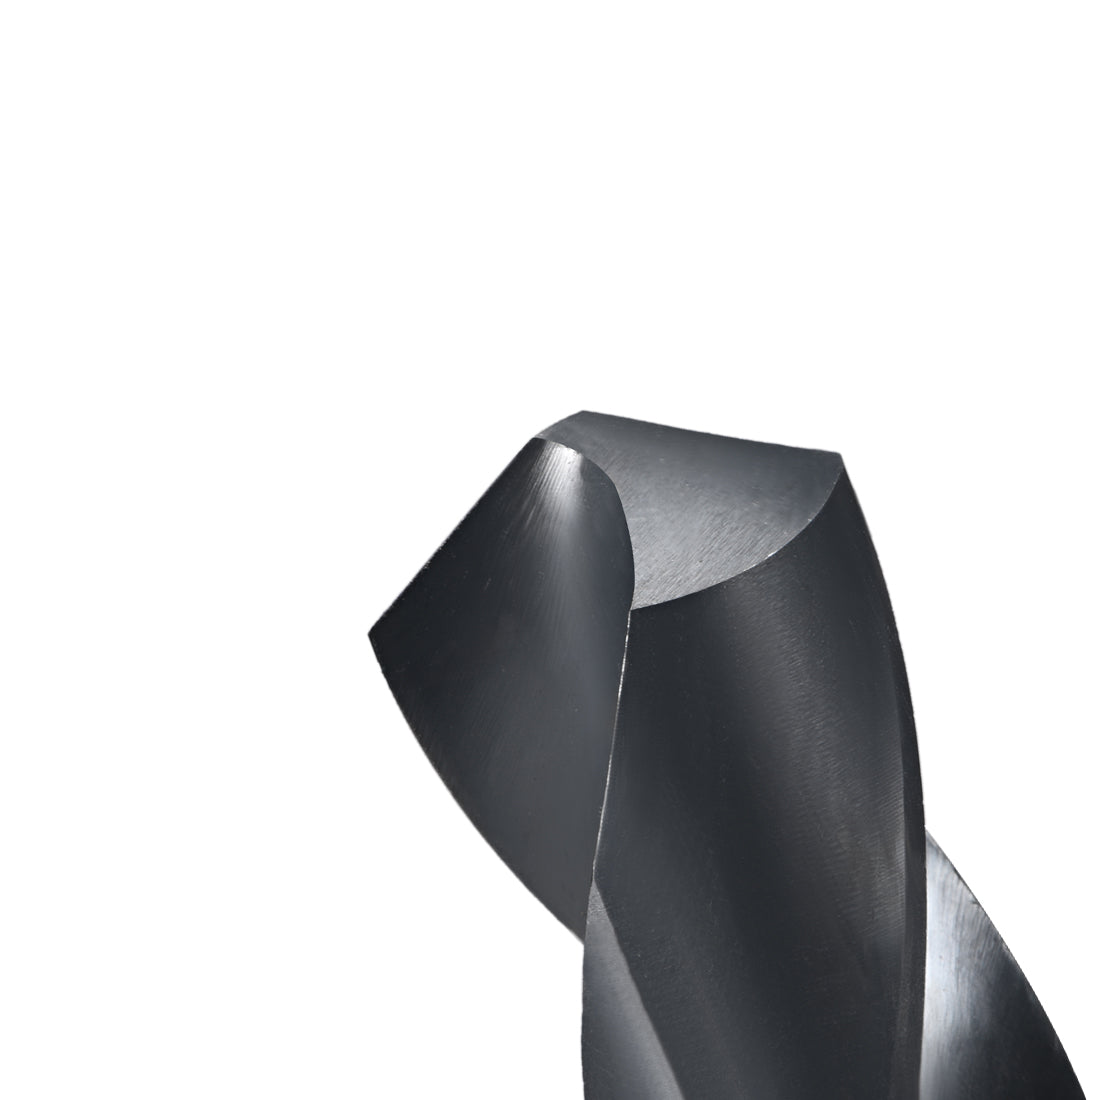 uxcell Uxcell Reduced Shank Drill Bit 16.5mm HSS 6542 Black Oxide with 1/2 Inch Straight Shank